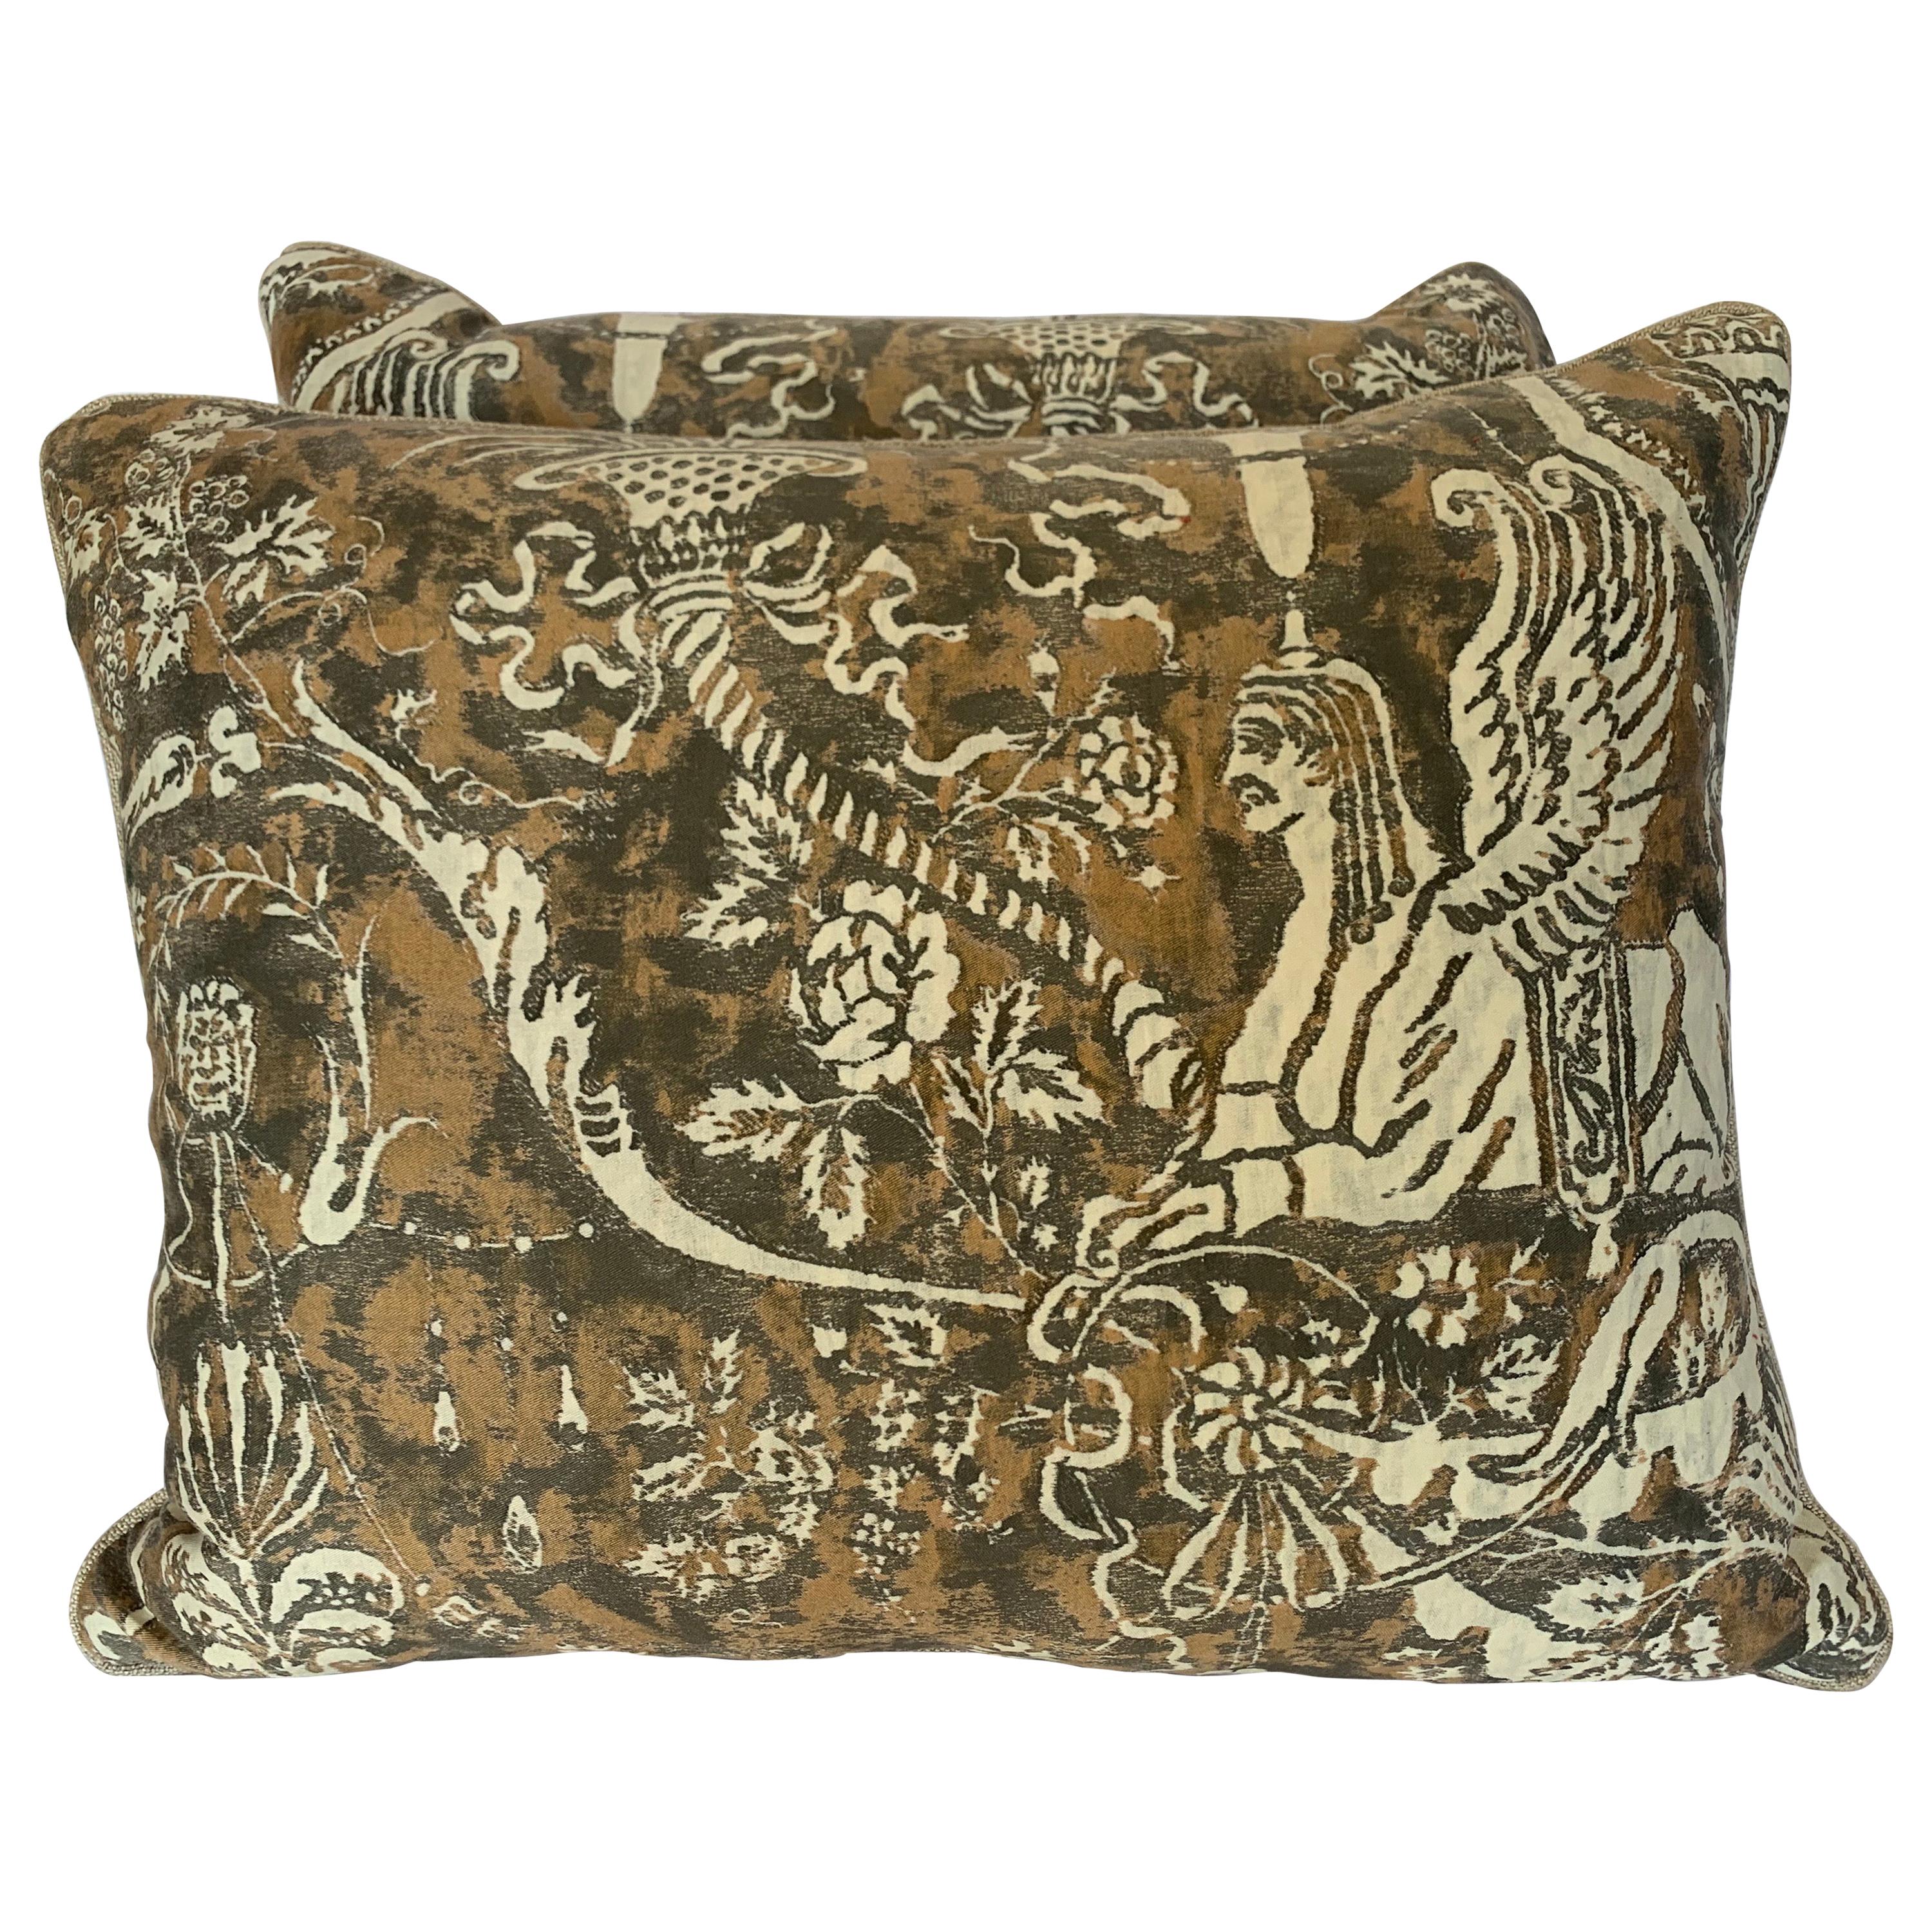 Pair of Fortuny Textile Pillows w/ Sphinxes